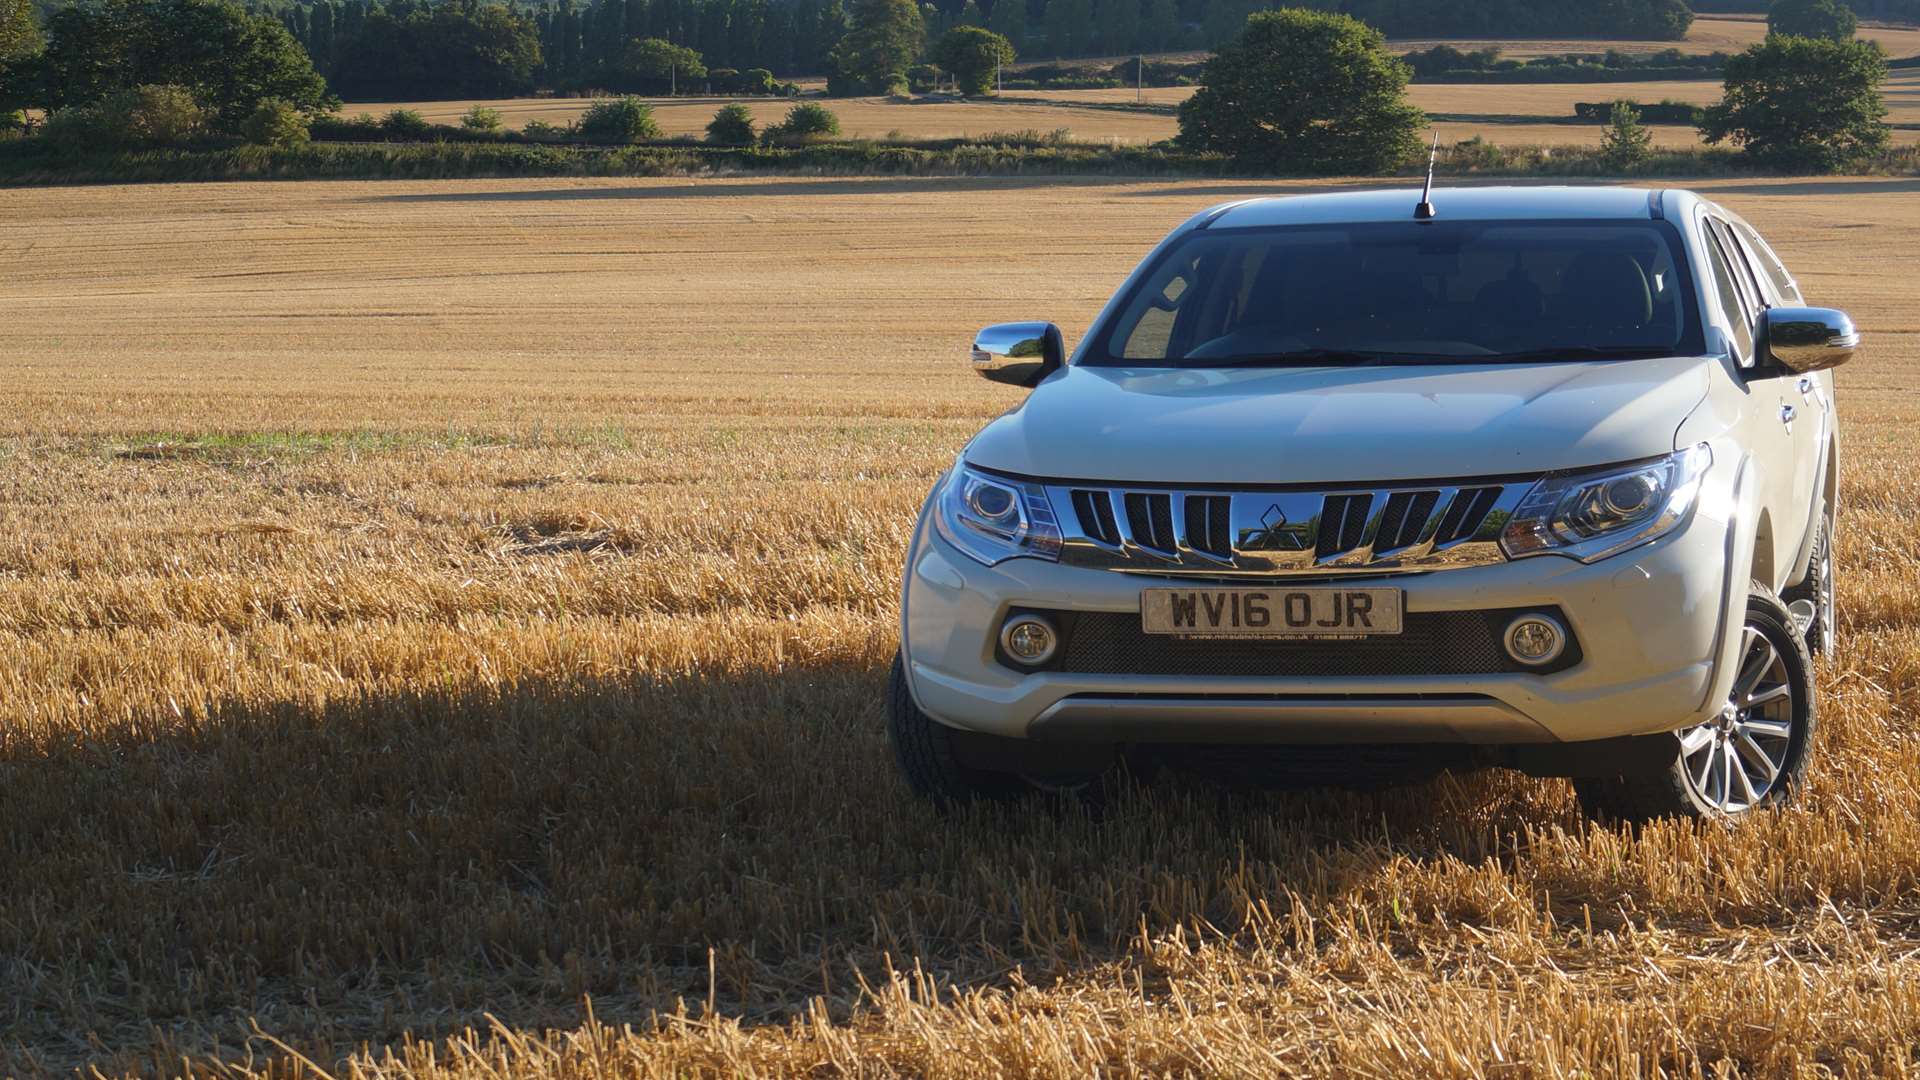 The L200 is an enormously capable working vehicle that can also serve as family transport